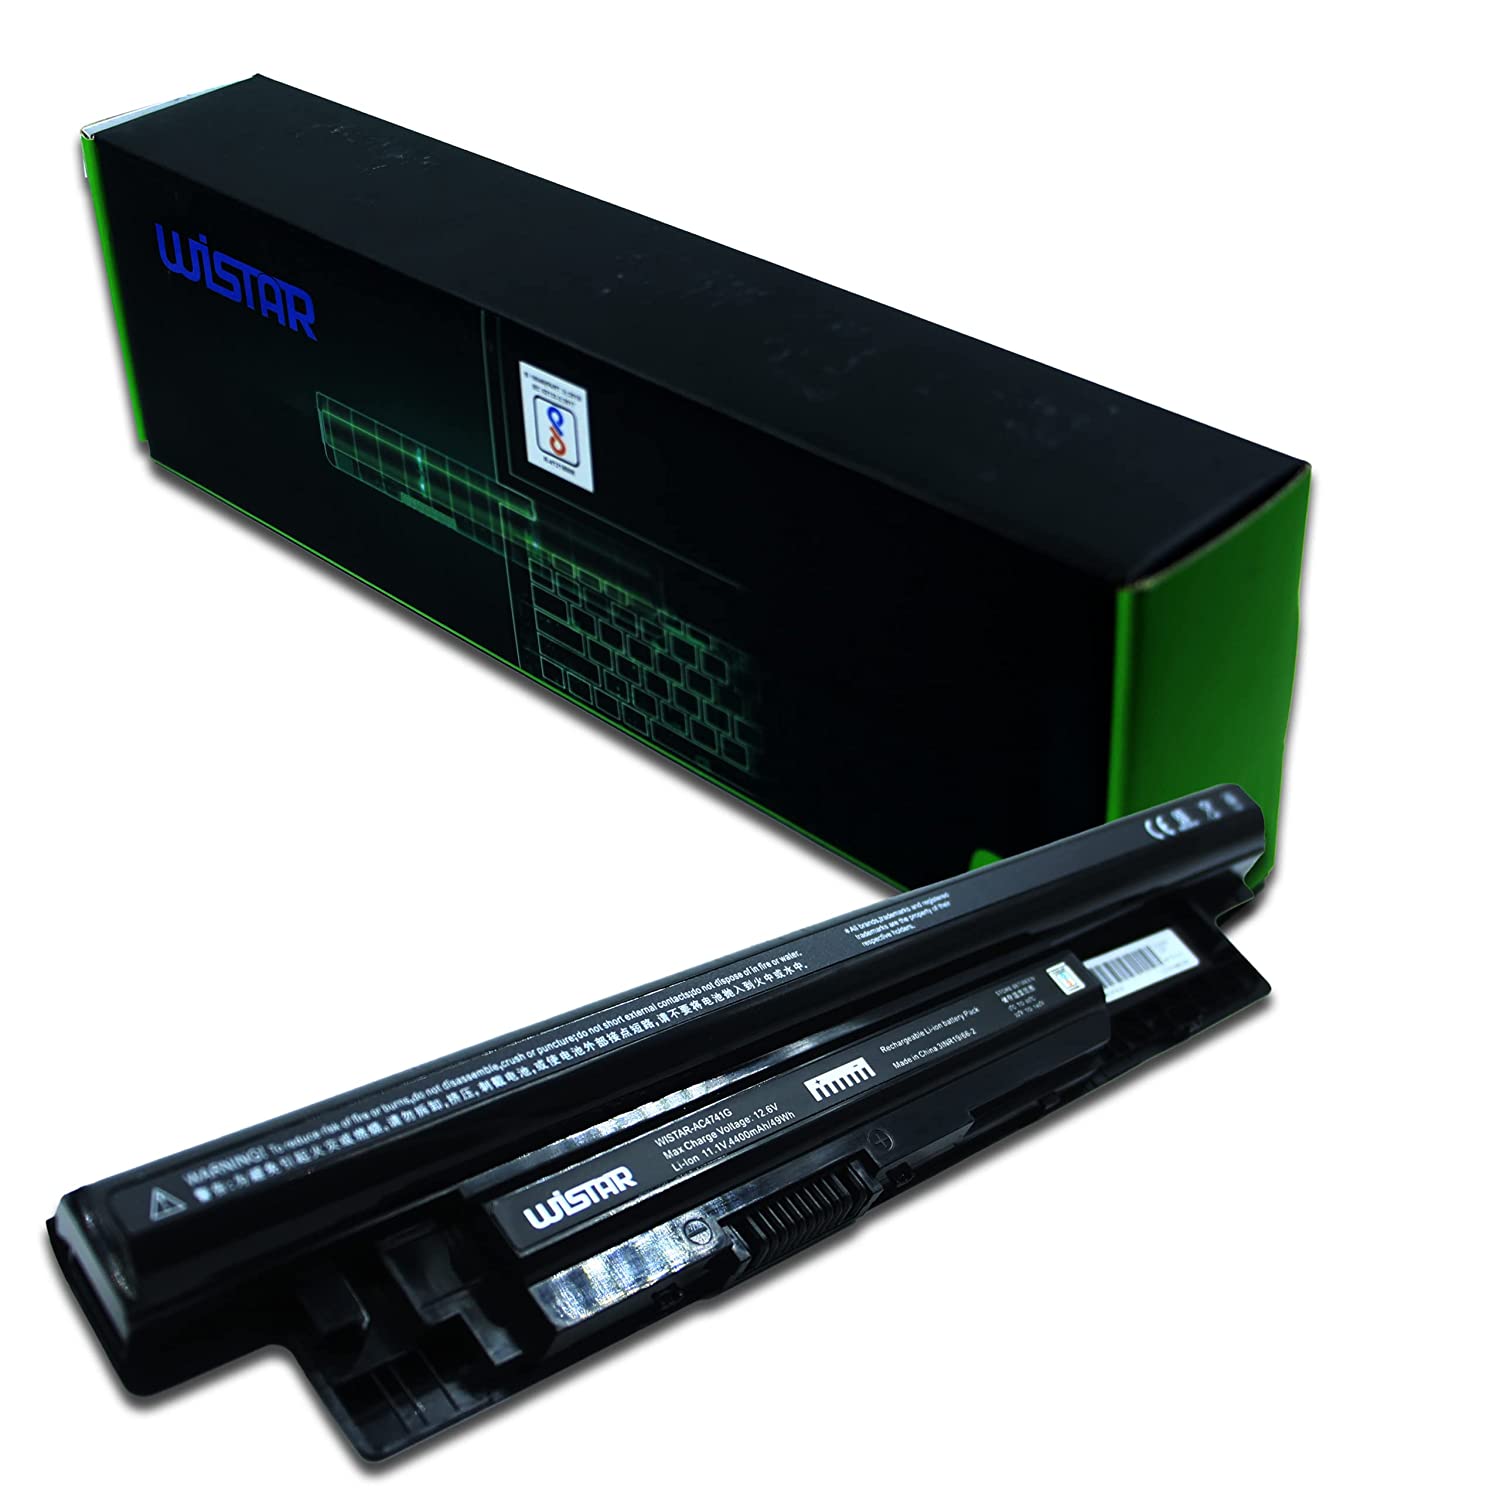 Laptop Battery 6 Cell for Dell Inspiron 0MF69, MR90Y, 3421, 3437, N5521, N5537, N5721, N5737, 14 (3421 3437 5421 n3421 n5421), 14R (3421), 15R (3521 3537 5521 5537 n3521 n5521 n5537), 17R (3721 5737 3721 3737 n5721 n5737) Latitude 14-3000, 15-3000, 3440, 3540, E3440, E3540, 2421, 2521